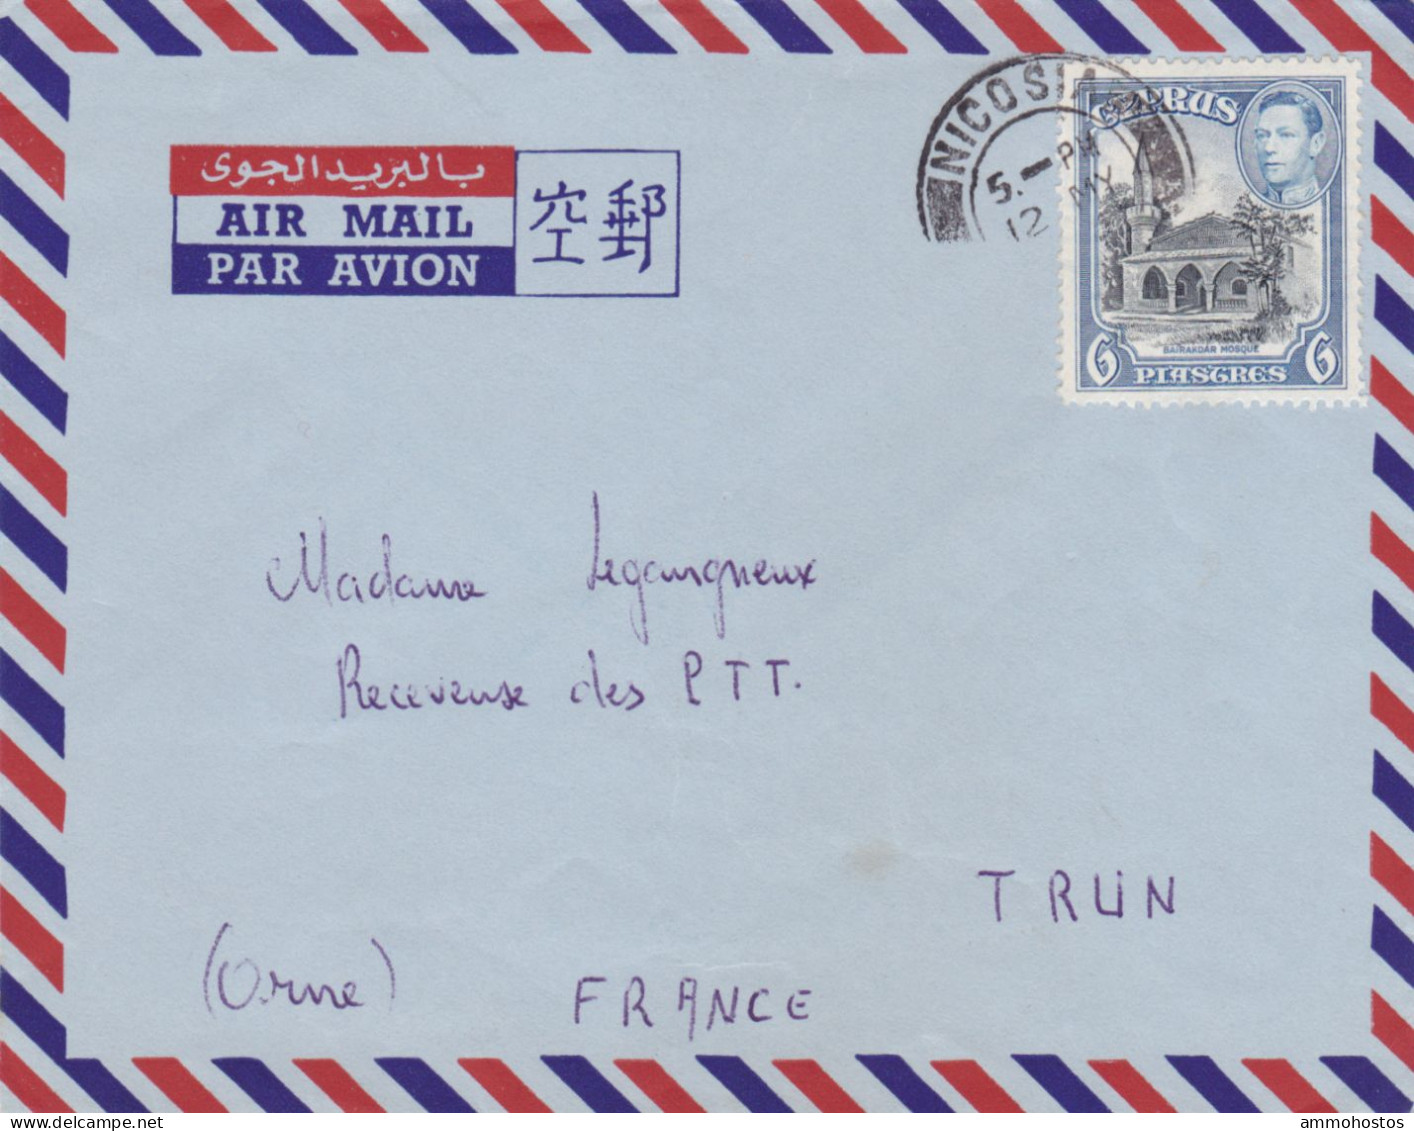 CYPRUS KGVI AIRMAIL COVER NICOSIA FRANCE 6 PIASTRE RATE - Chipre (...-1960)